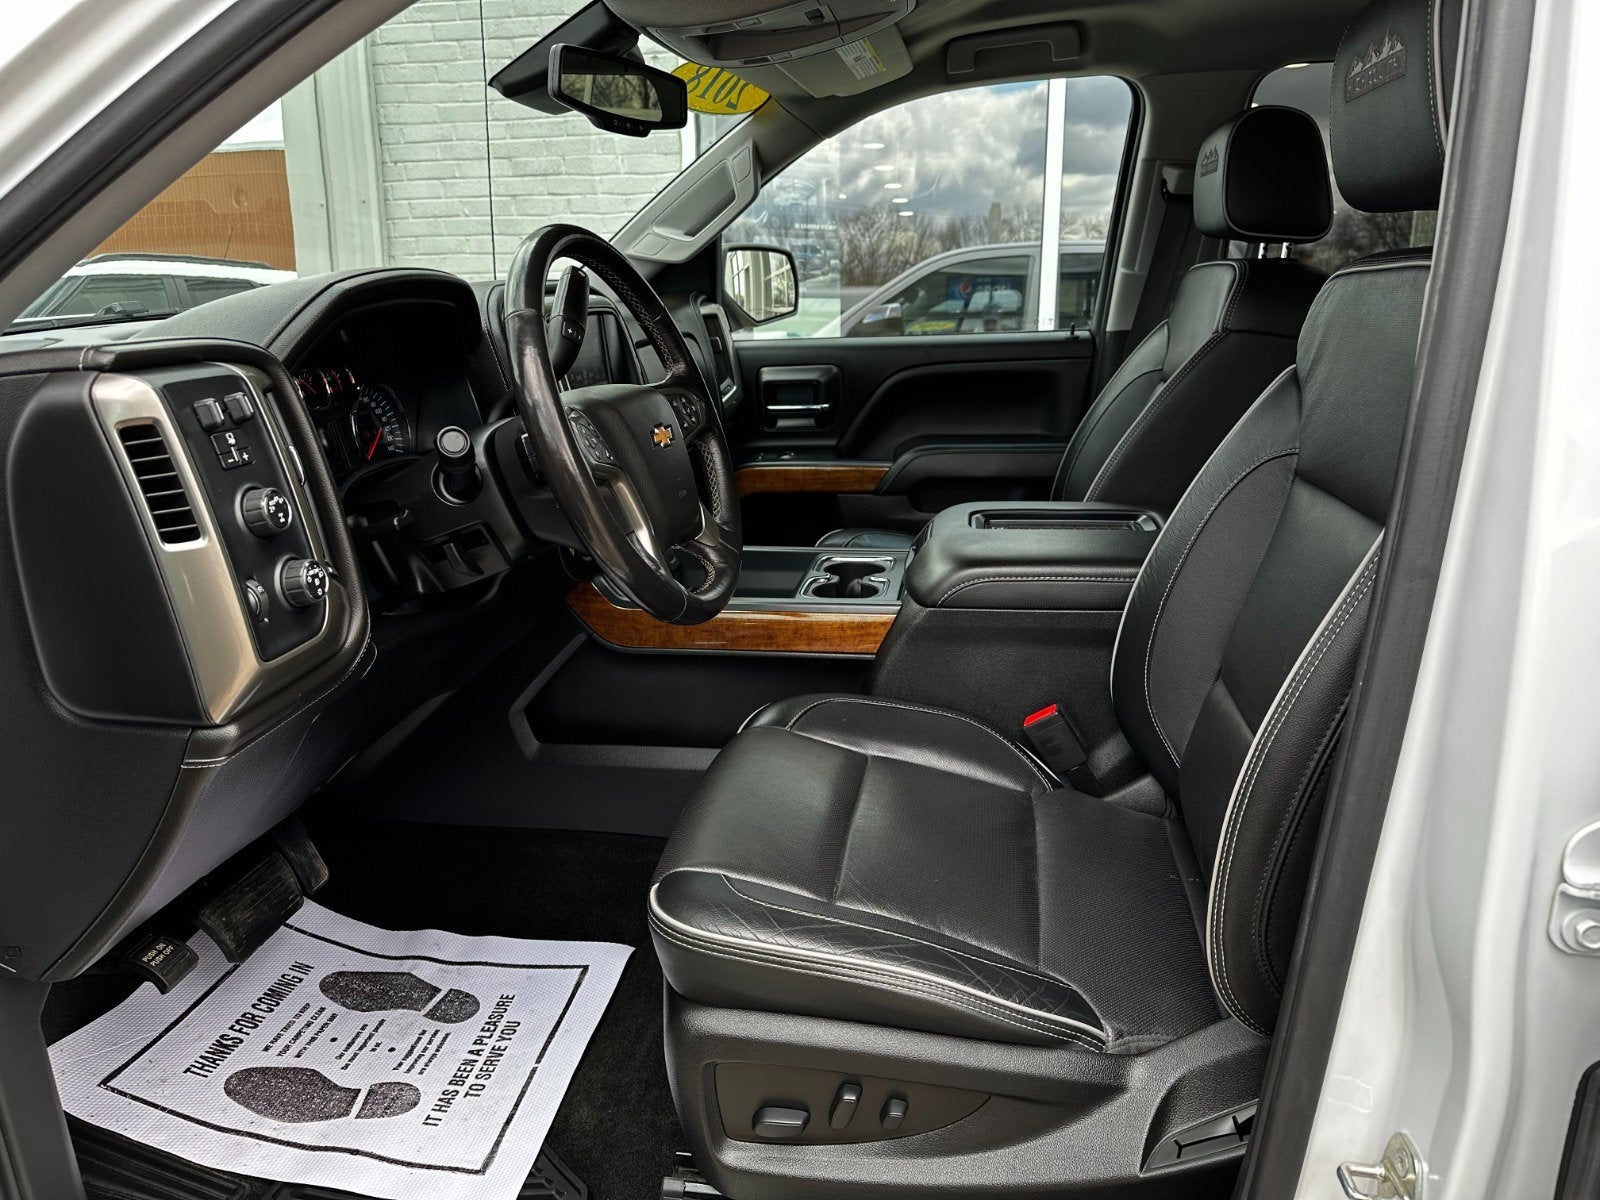 2018 Chevrolet Silverado 1500 High Country, Navigation, Heated & Vented Seats